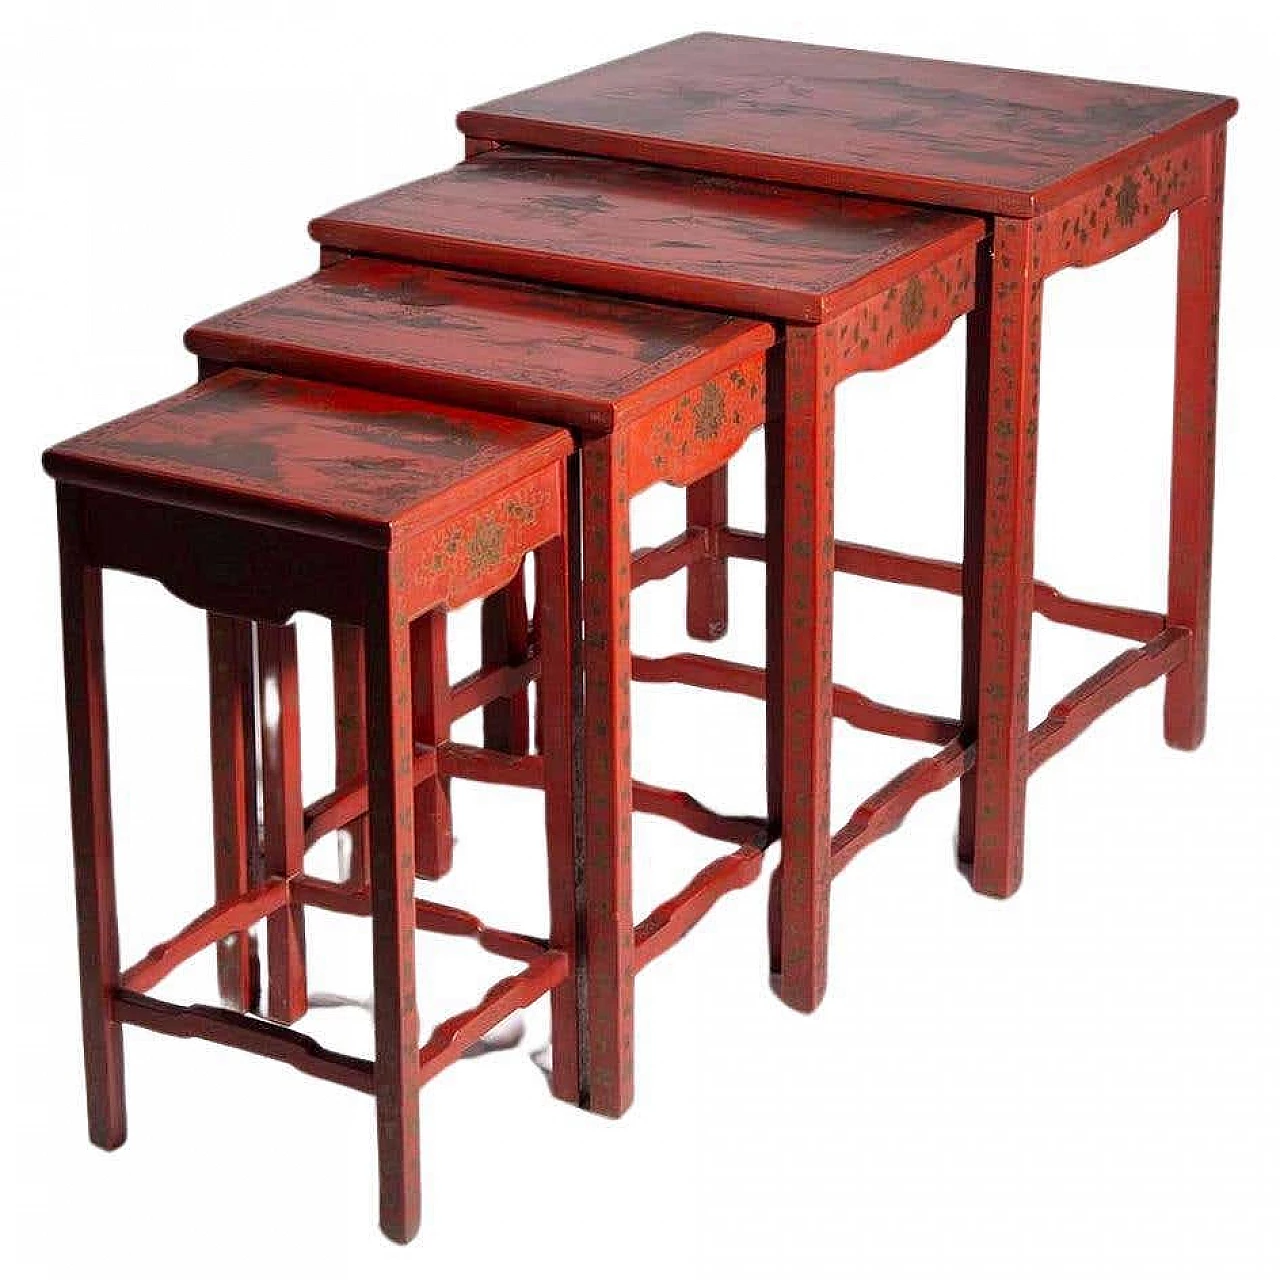 4 Chinese nesting coffee tables in red lacquered wood, late 19th century 13